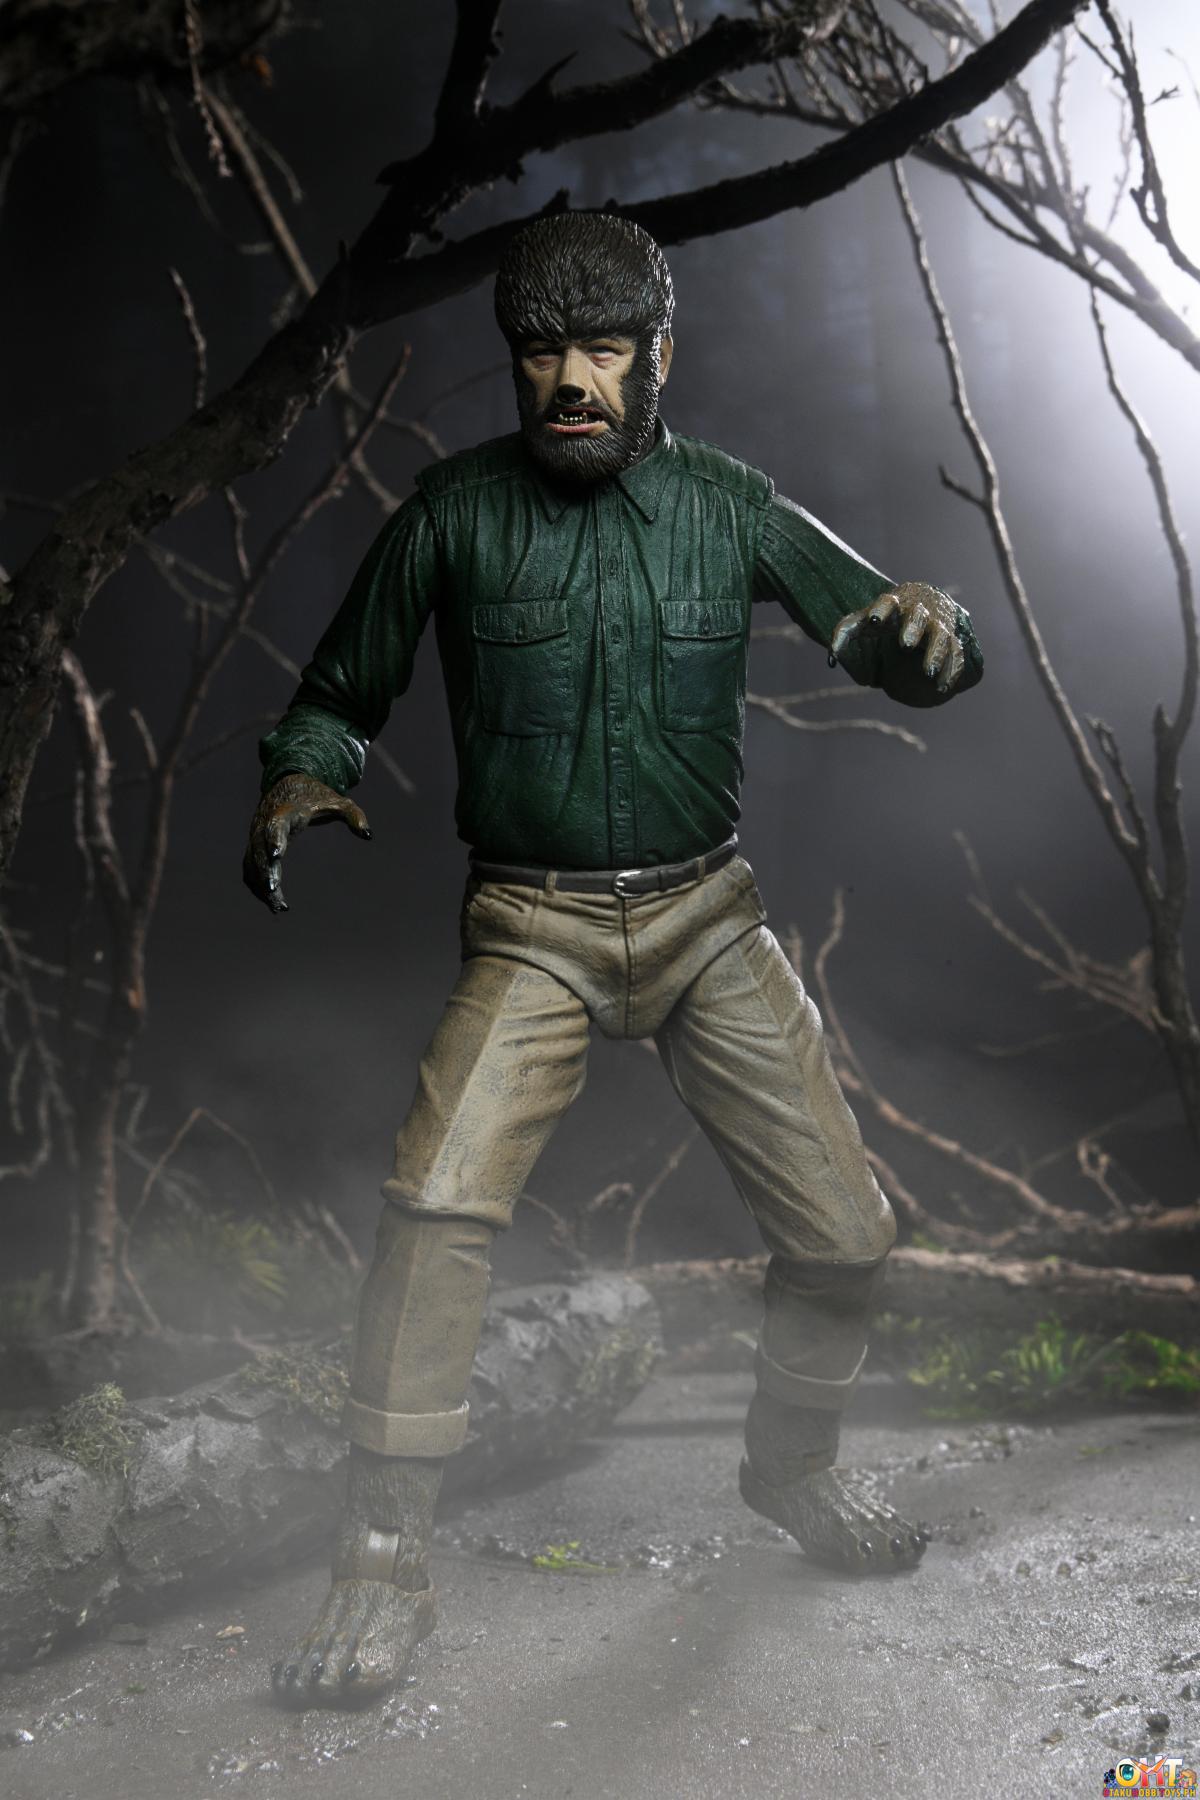 NECA 7” Scale Action Figure Ultimate Wolf Man - Universal Monsters